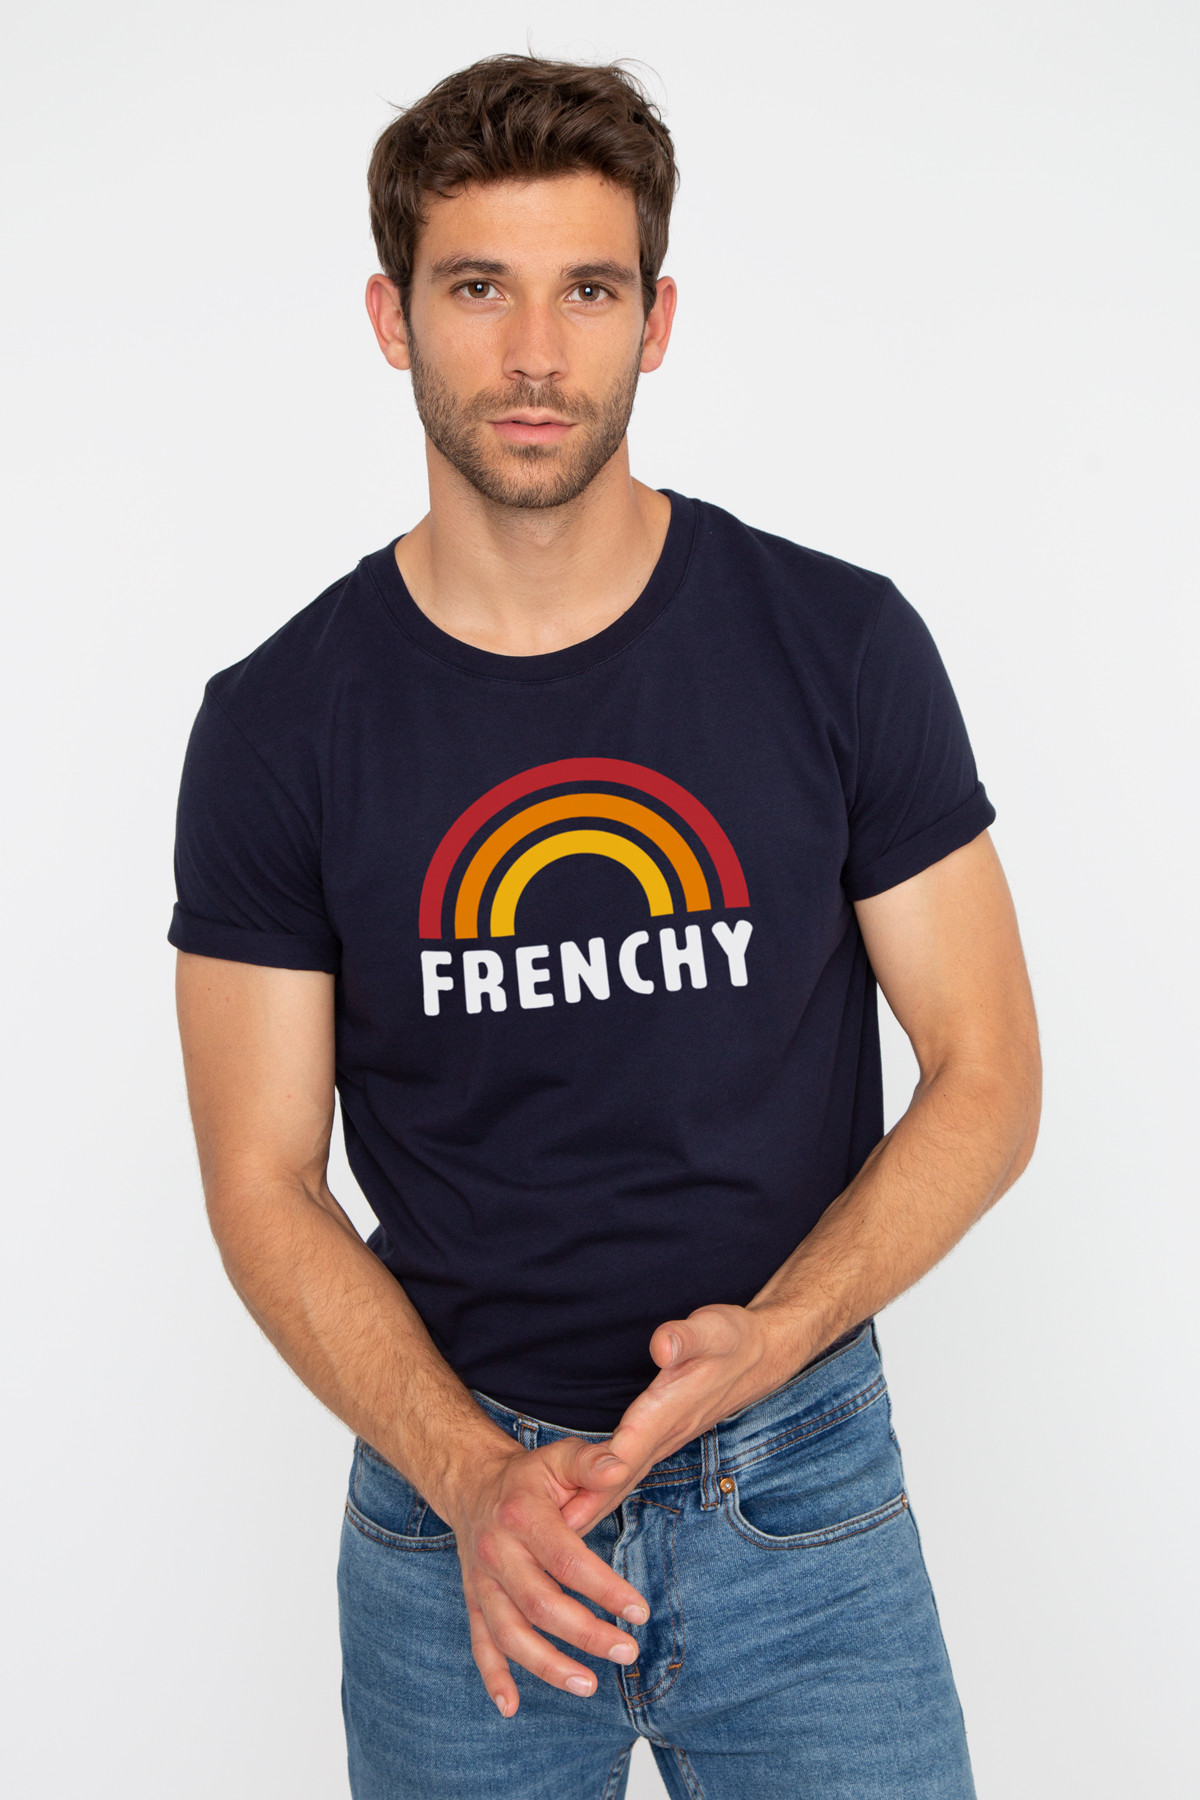 T-shirt FRENCHY French Disorder